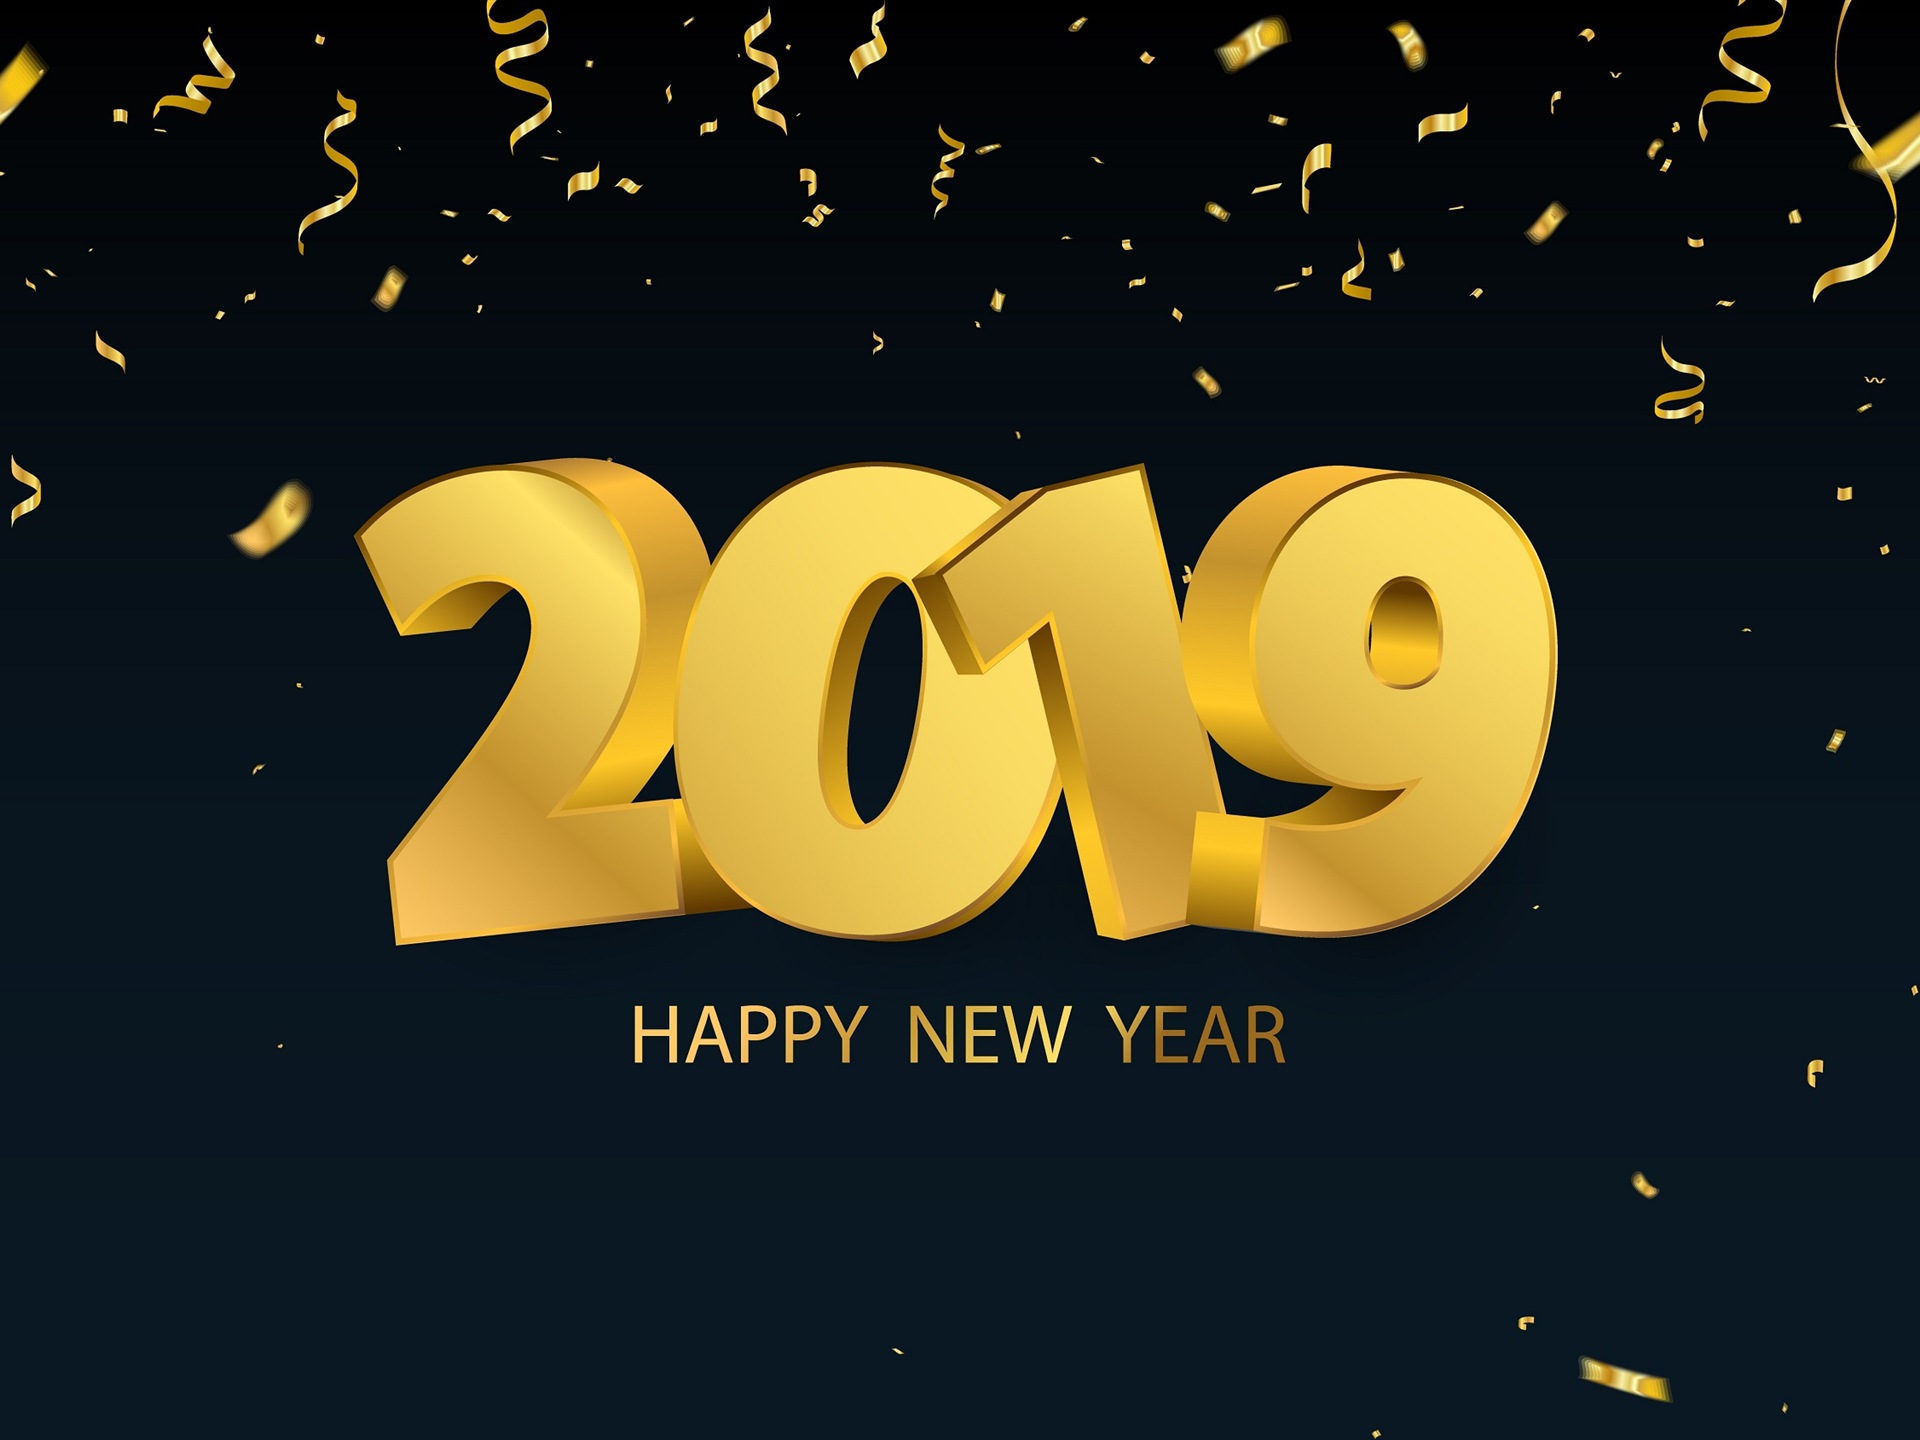 Happy New Year 2019 HD wallpapers #13 - 1920x1440